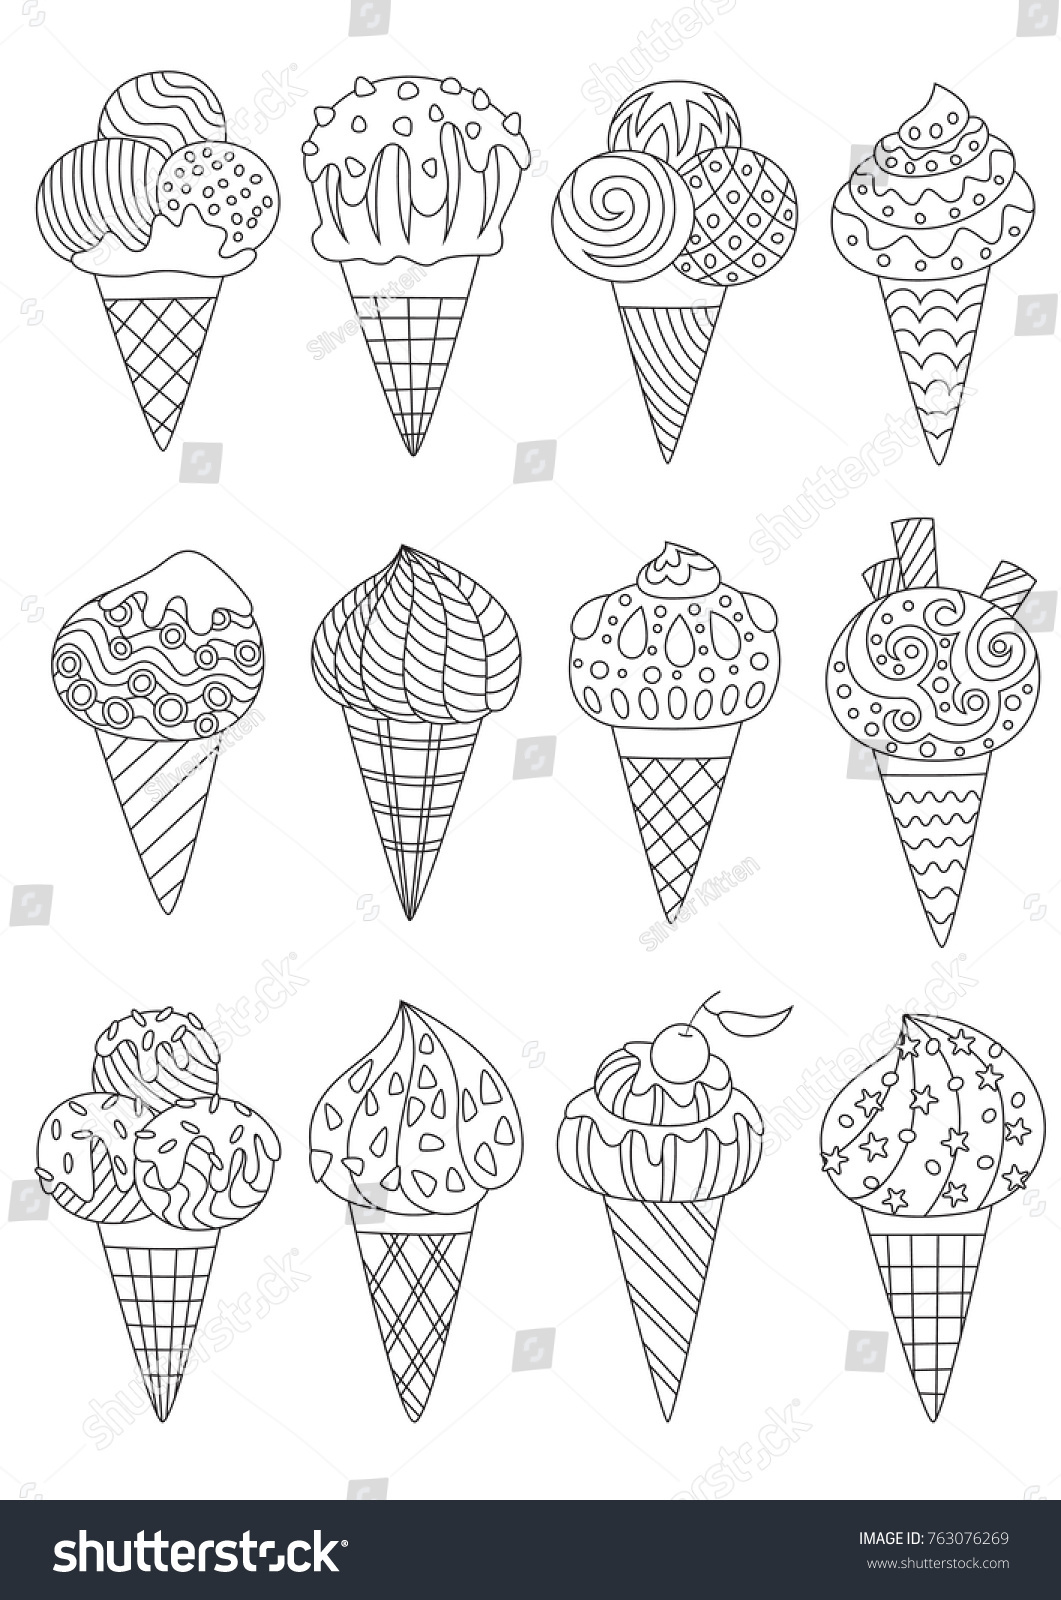 3,958 Cones coloring pages Images, Stock Photos & Vectors | Shutterstock